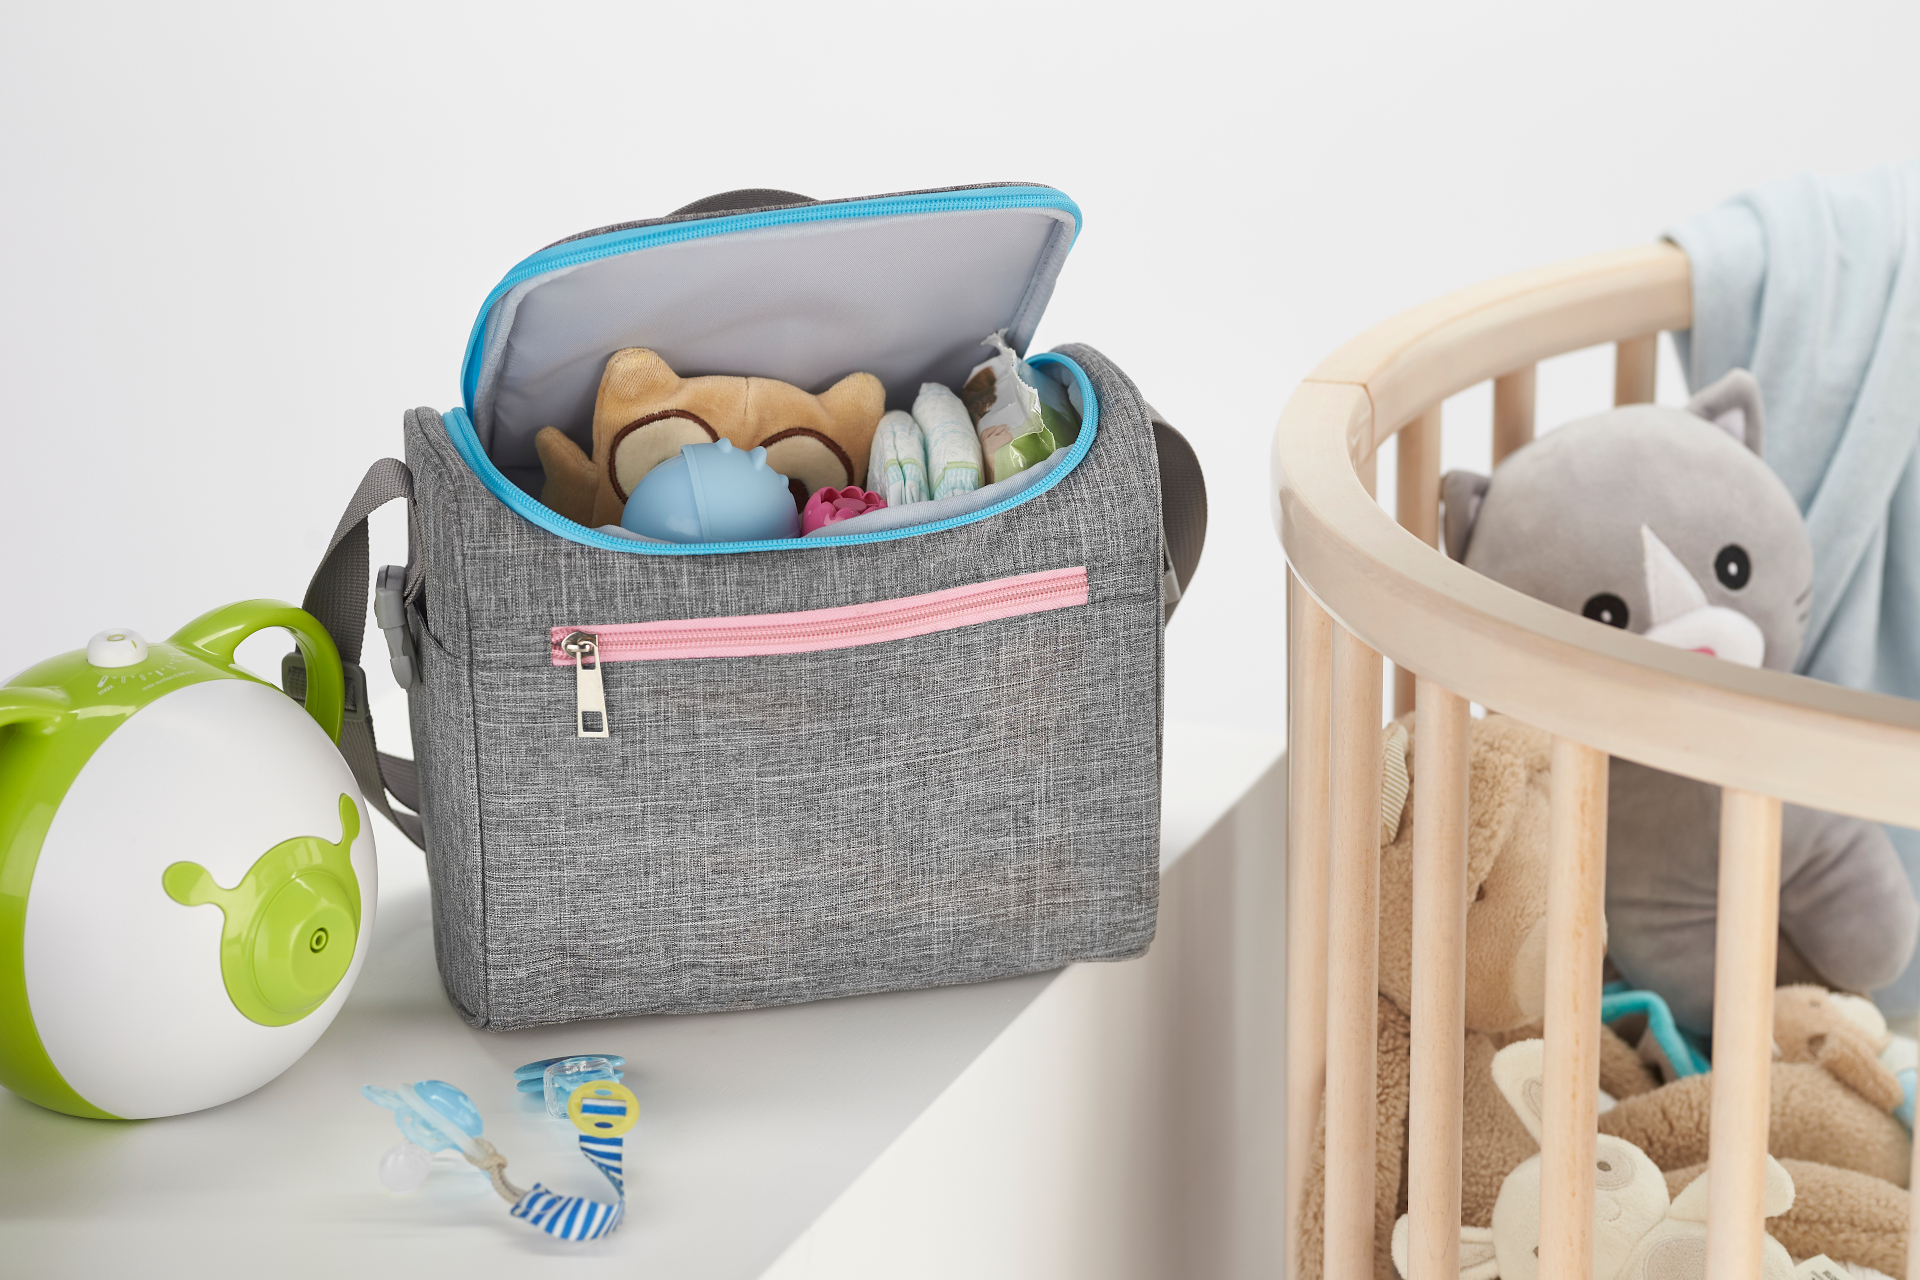 Nosiboo Bag Baby Organizer for smart organization of all the necessary baby accessories with a Nosiboo Pro Electric Nasal Aspirator for babies